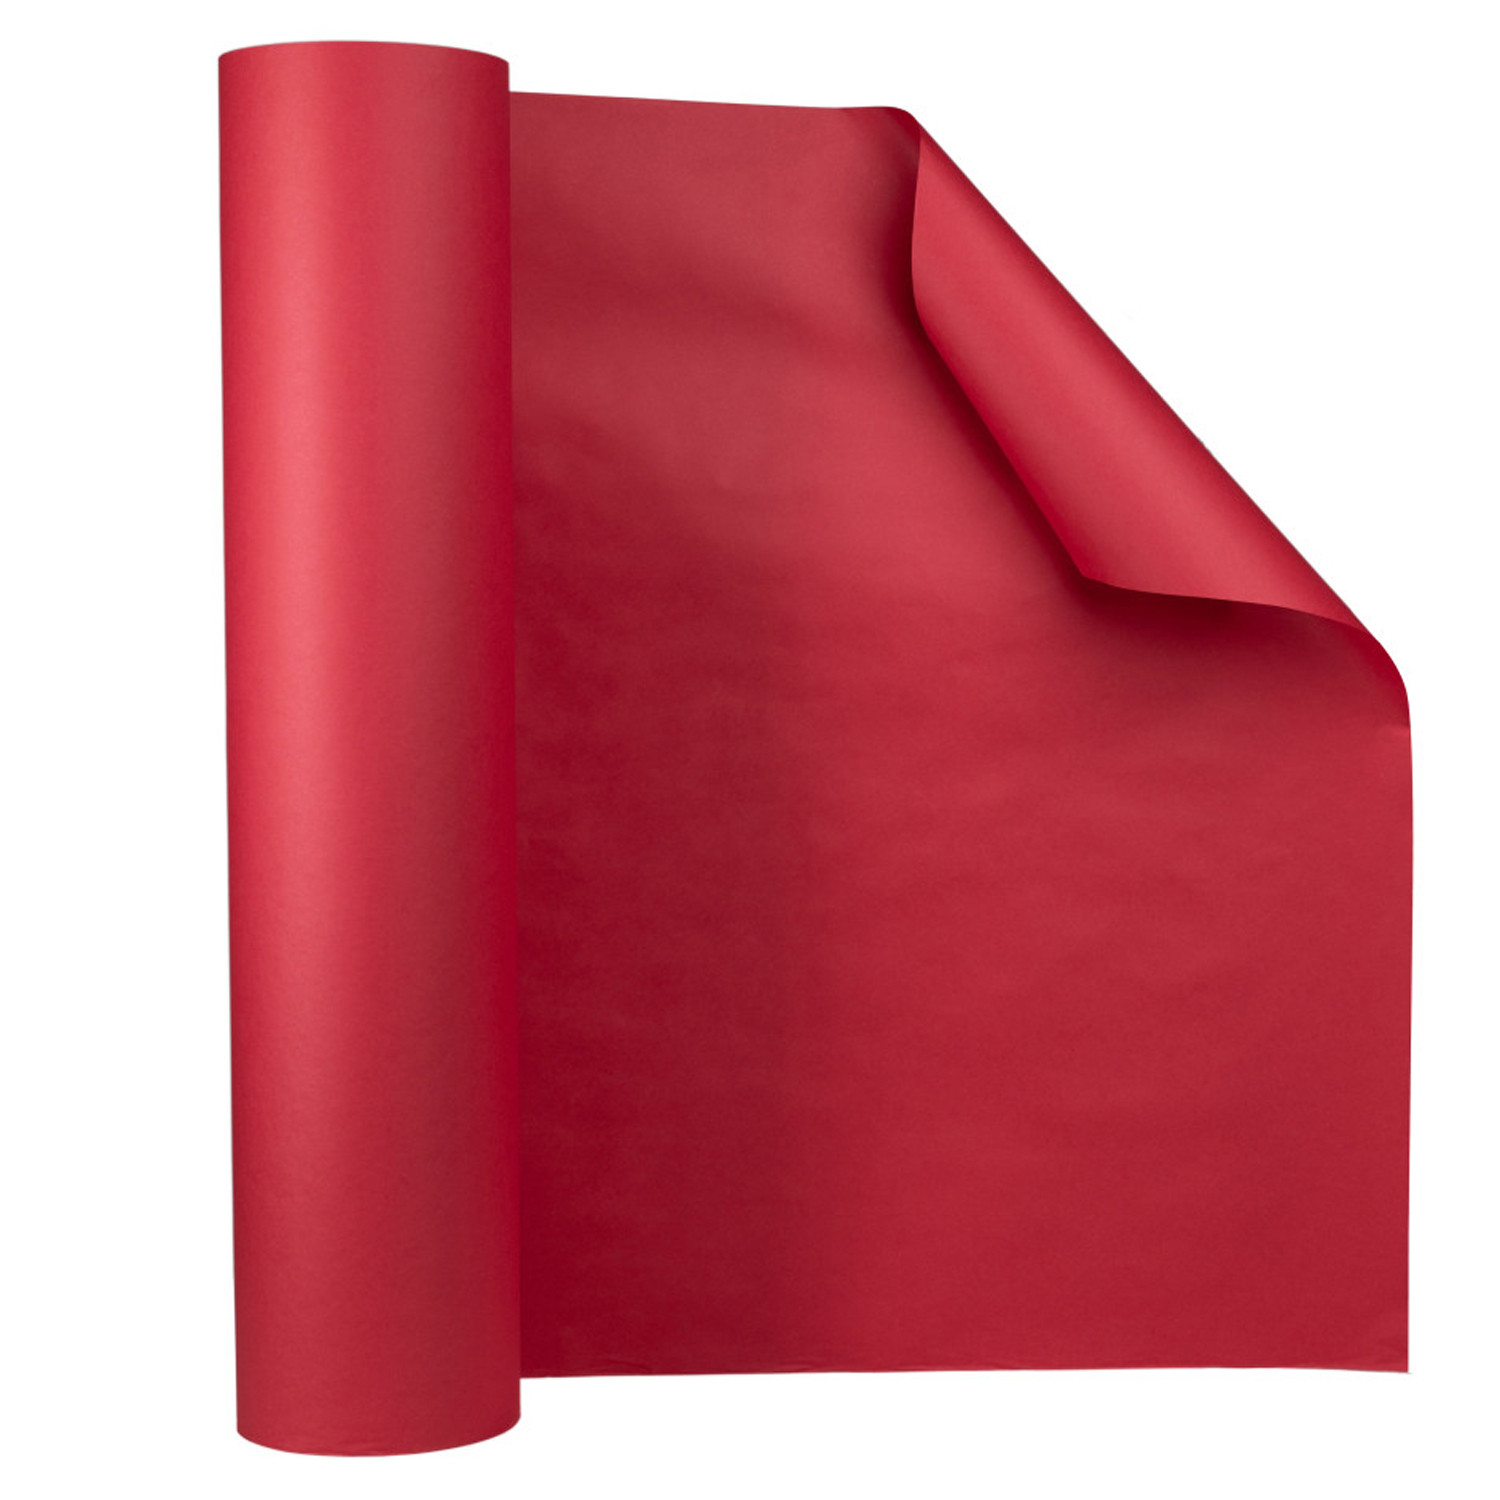 Red Paper in USA, Rolls of Craft Paper